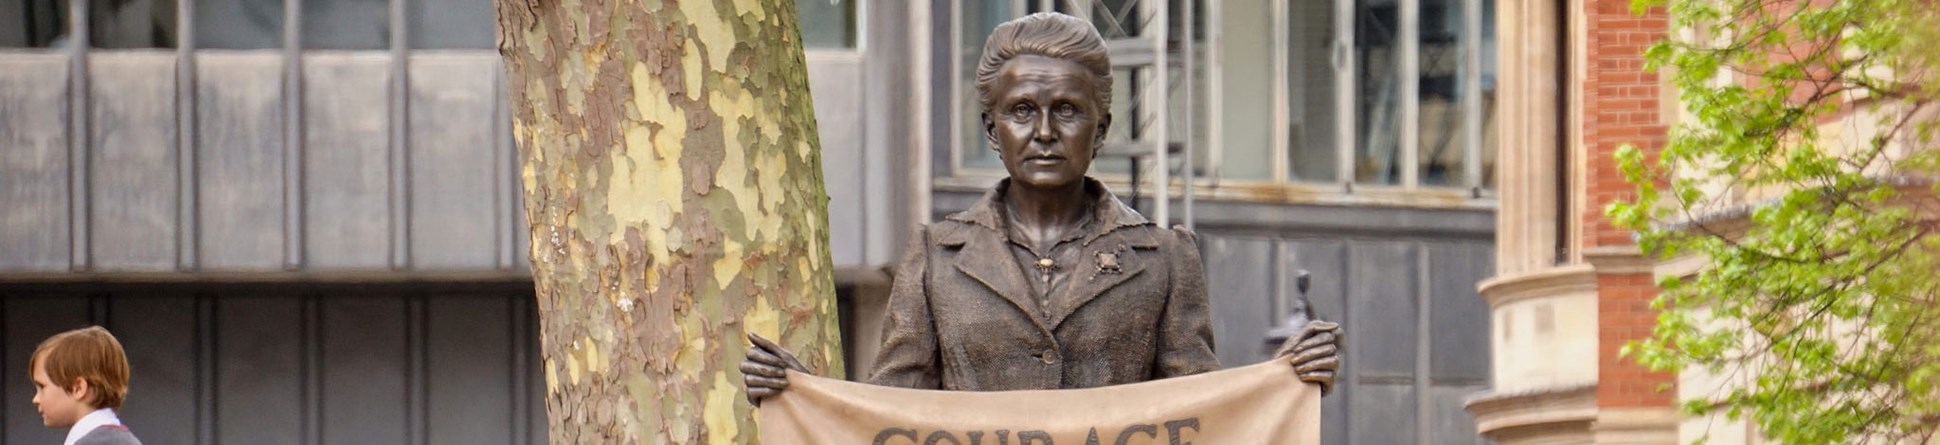 Statue of Millicent Fawcett holding a banner that displays text:
"Courage calls to courage everywhere"